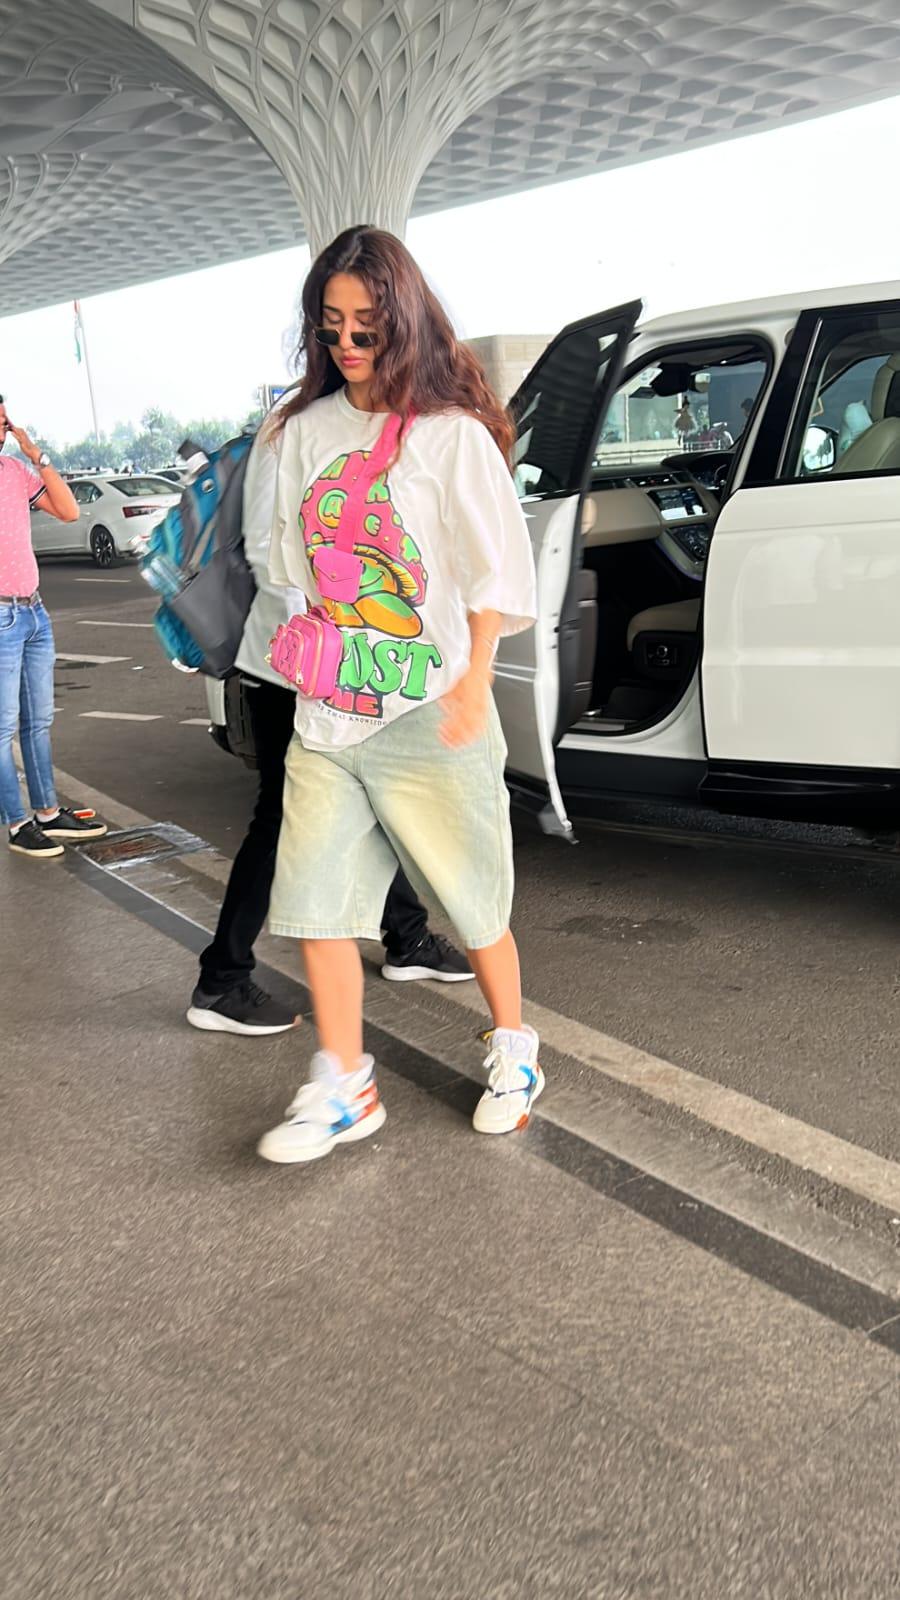 Disha Patani aced her airport look with a funky outfit